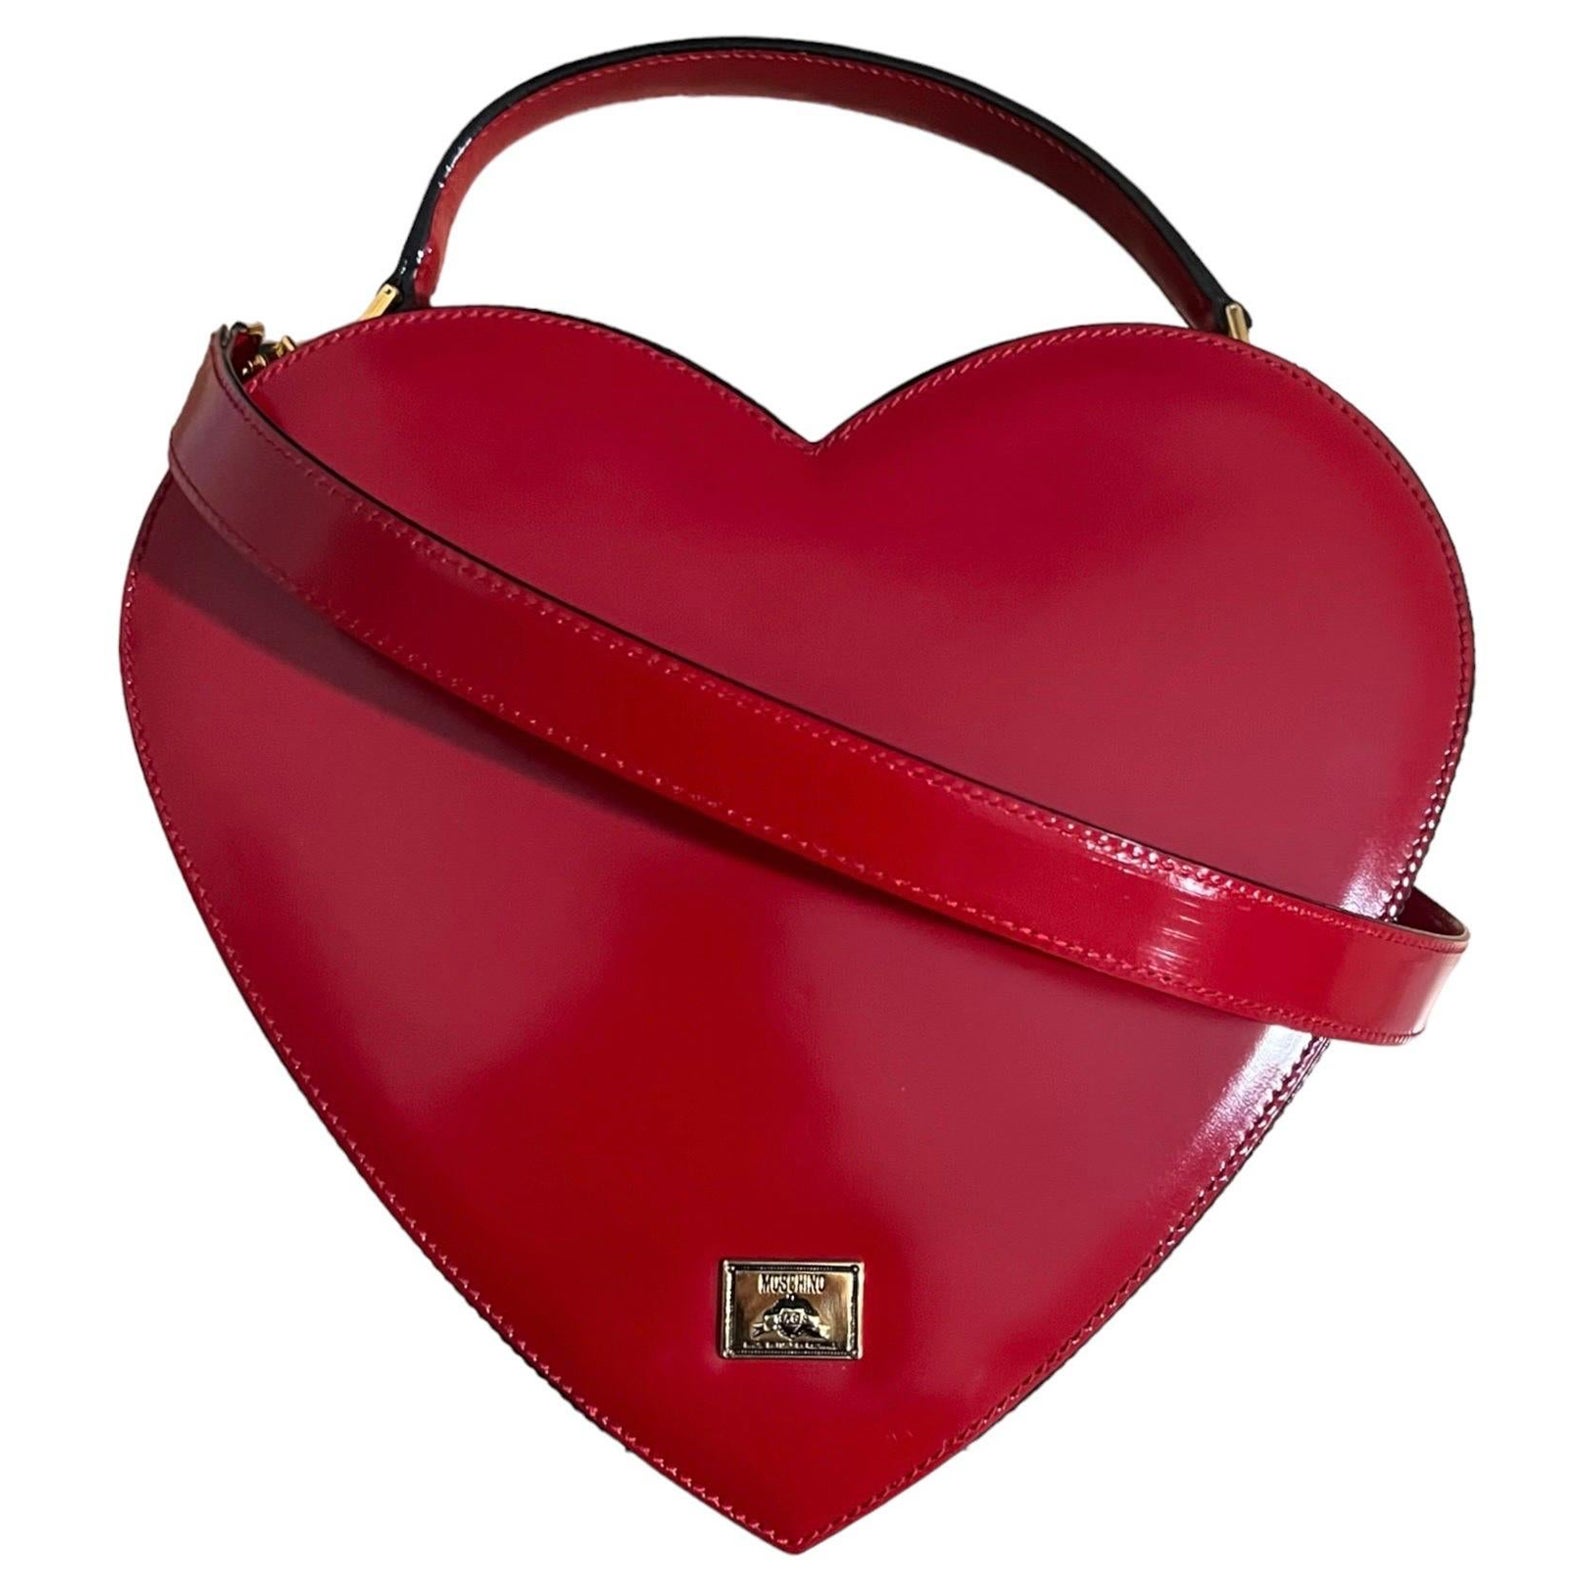 Moschino Vintage Red Leather Heart Bag The Nanny